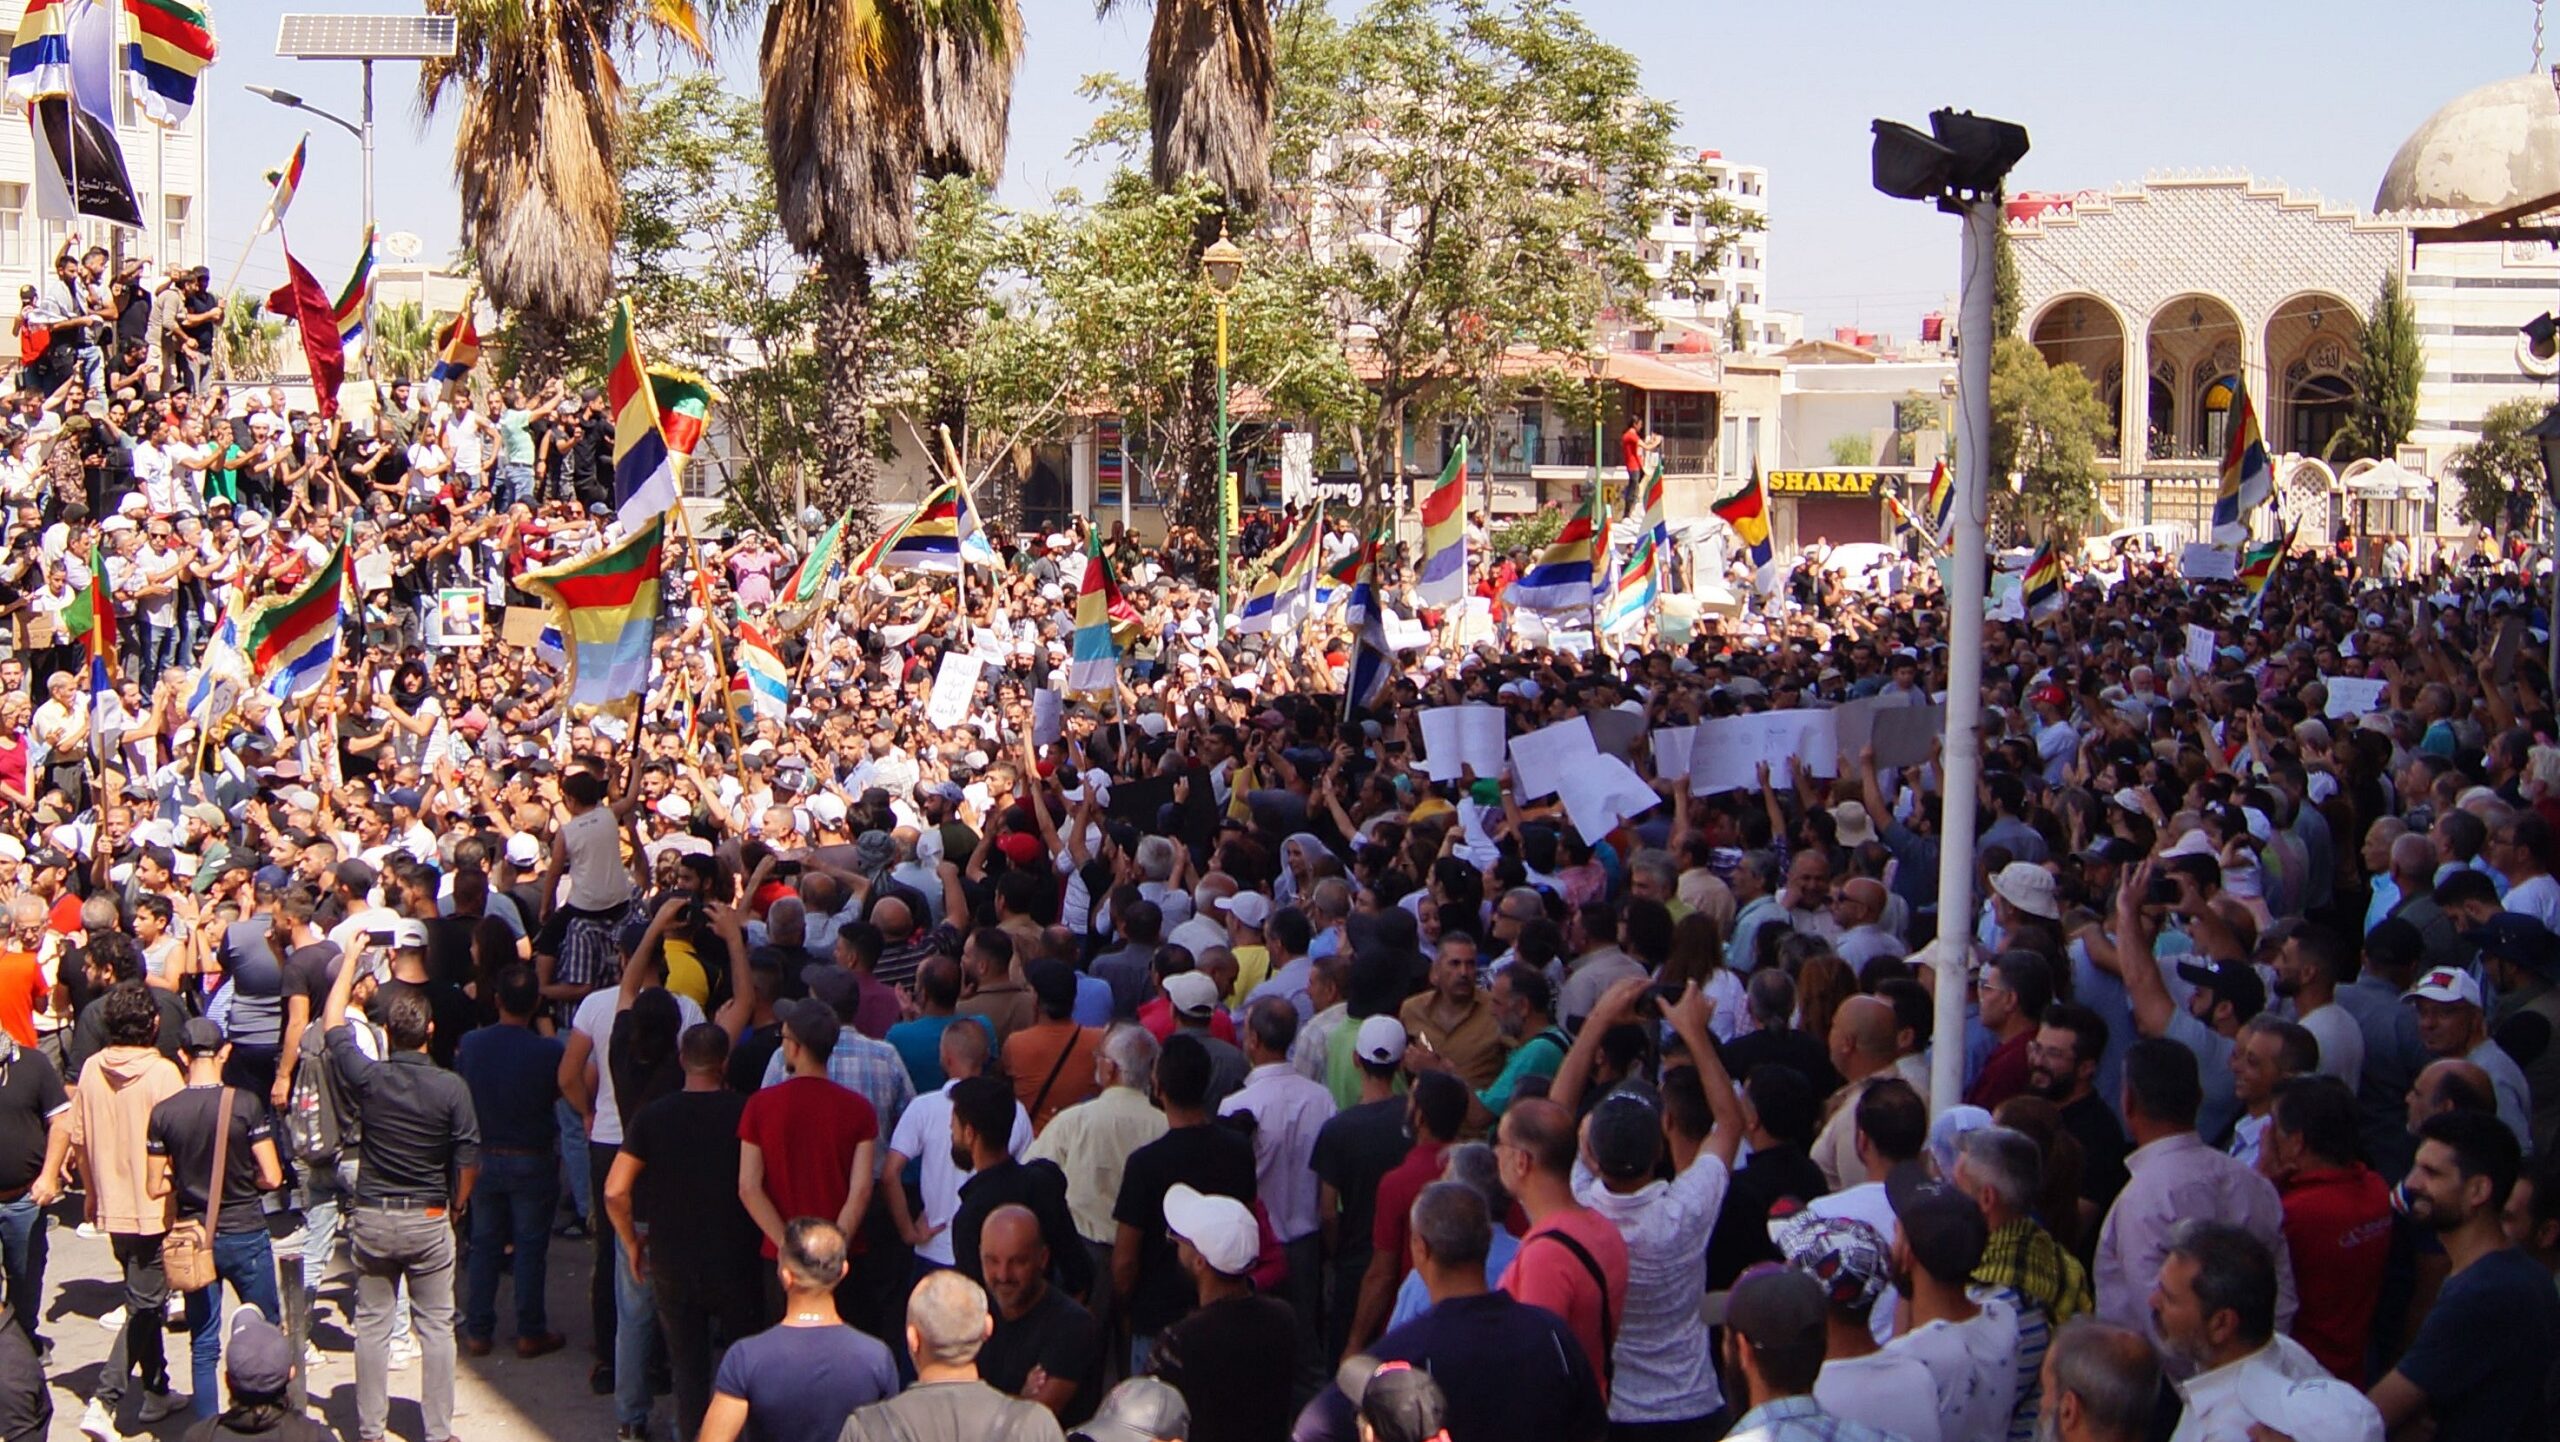 Thousands Rally in Sweida, Syria, Demanding End to Assad’s Rule